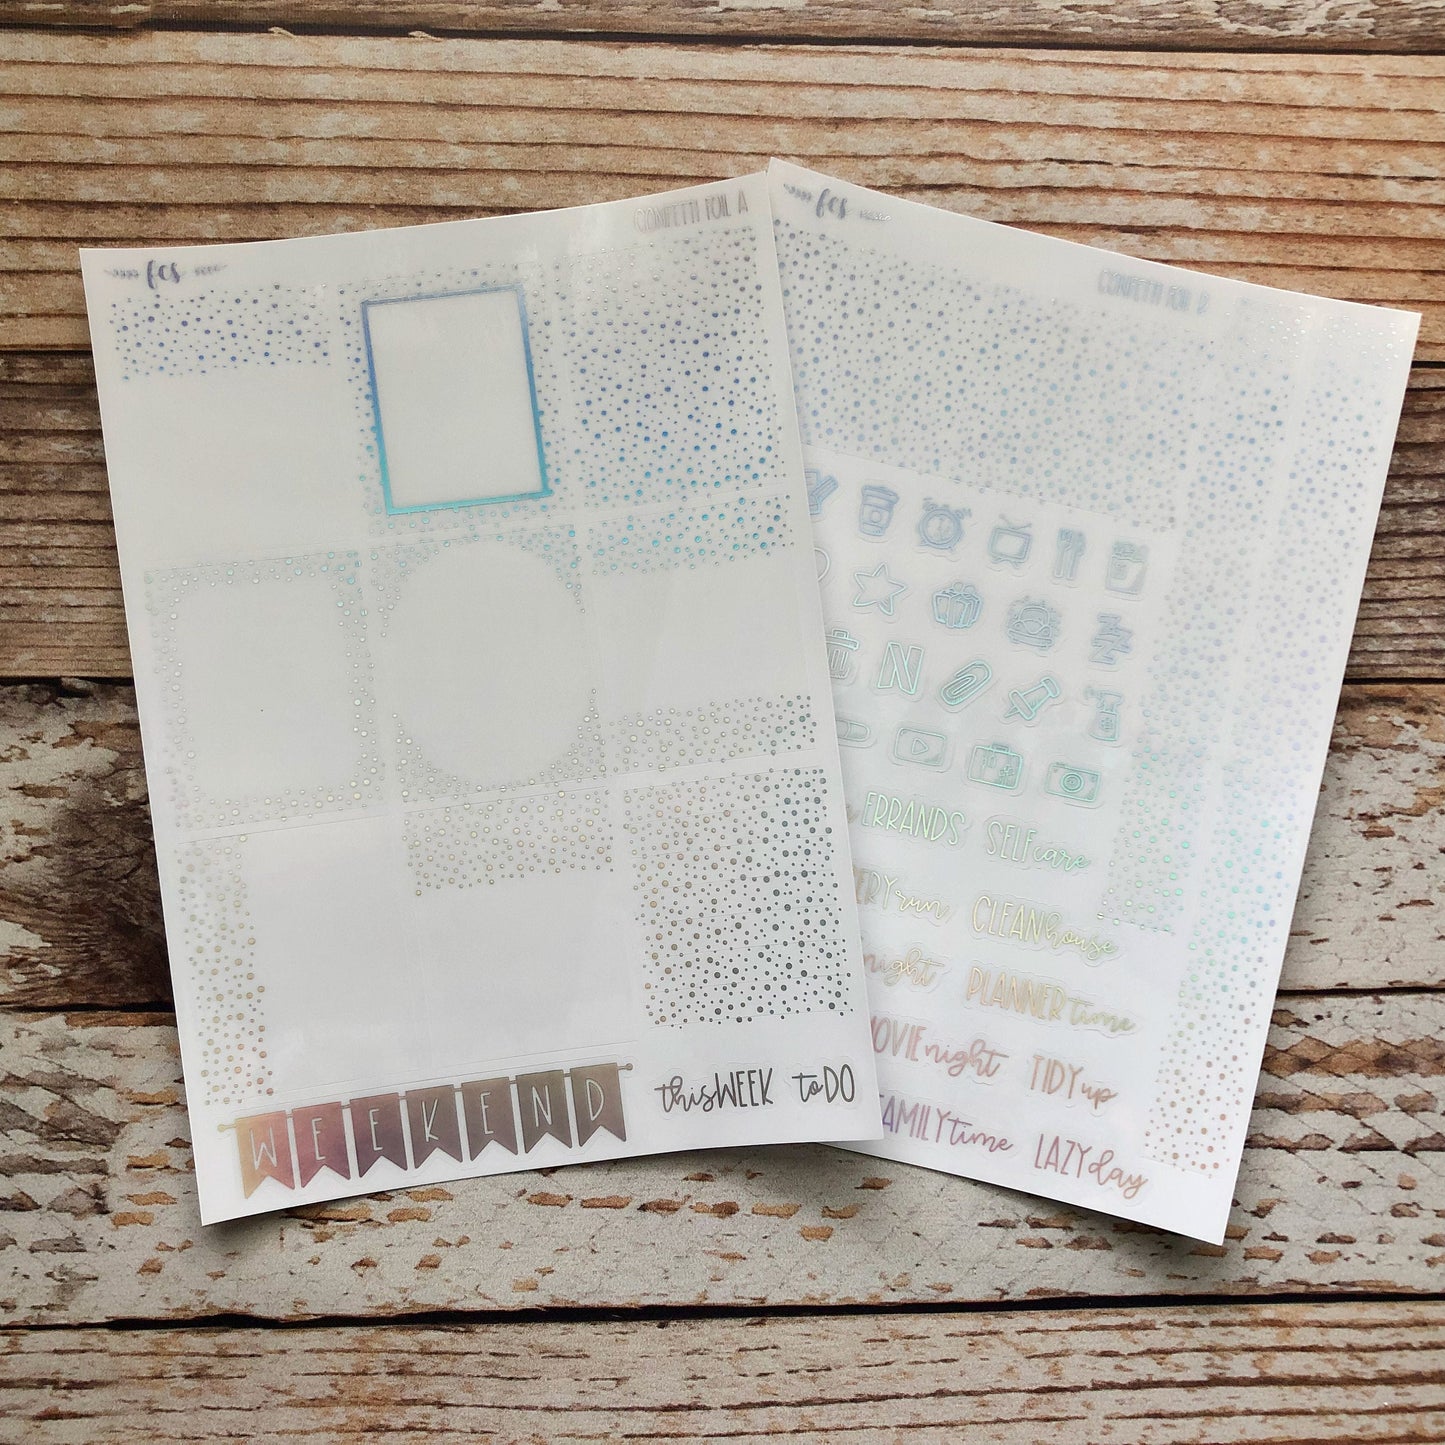 FB-02 || CONFETTI Foil Bundle | confetti clear foiled stickers | foiled planner stickers | full box overlays | header overlay | foiled icons